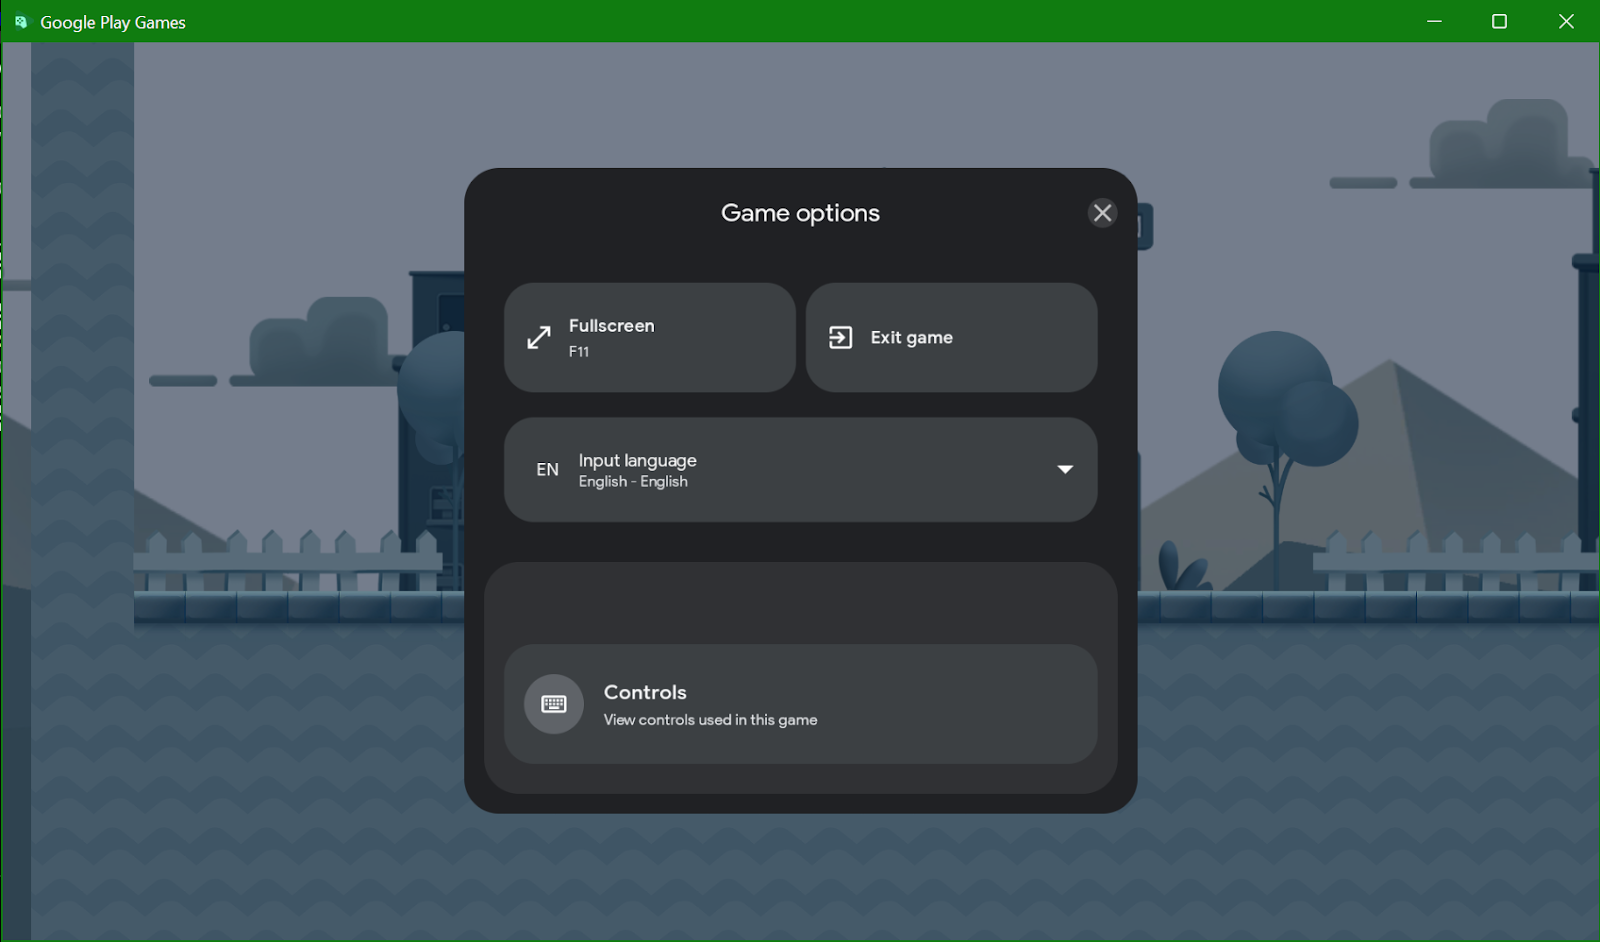 Screenshot of the "Game options" overlay in the Google Play Games emulator